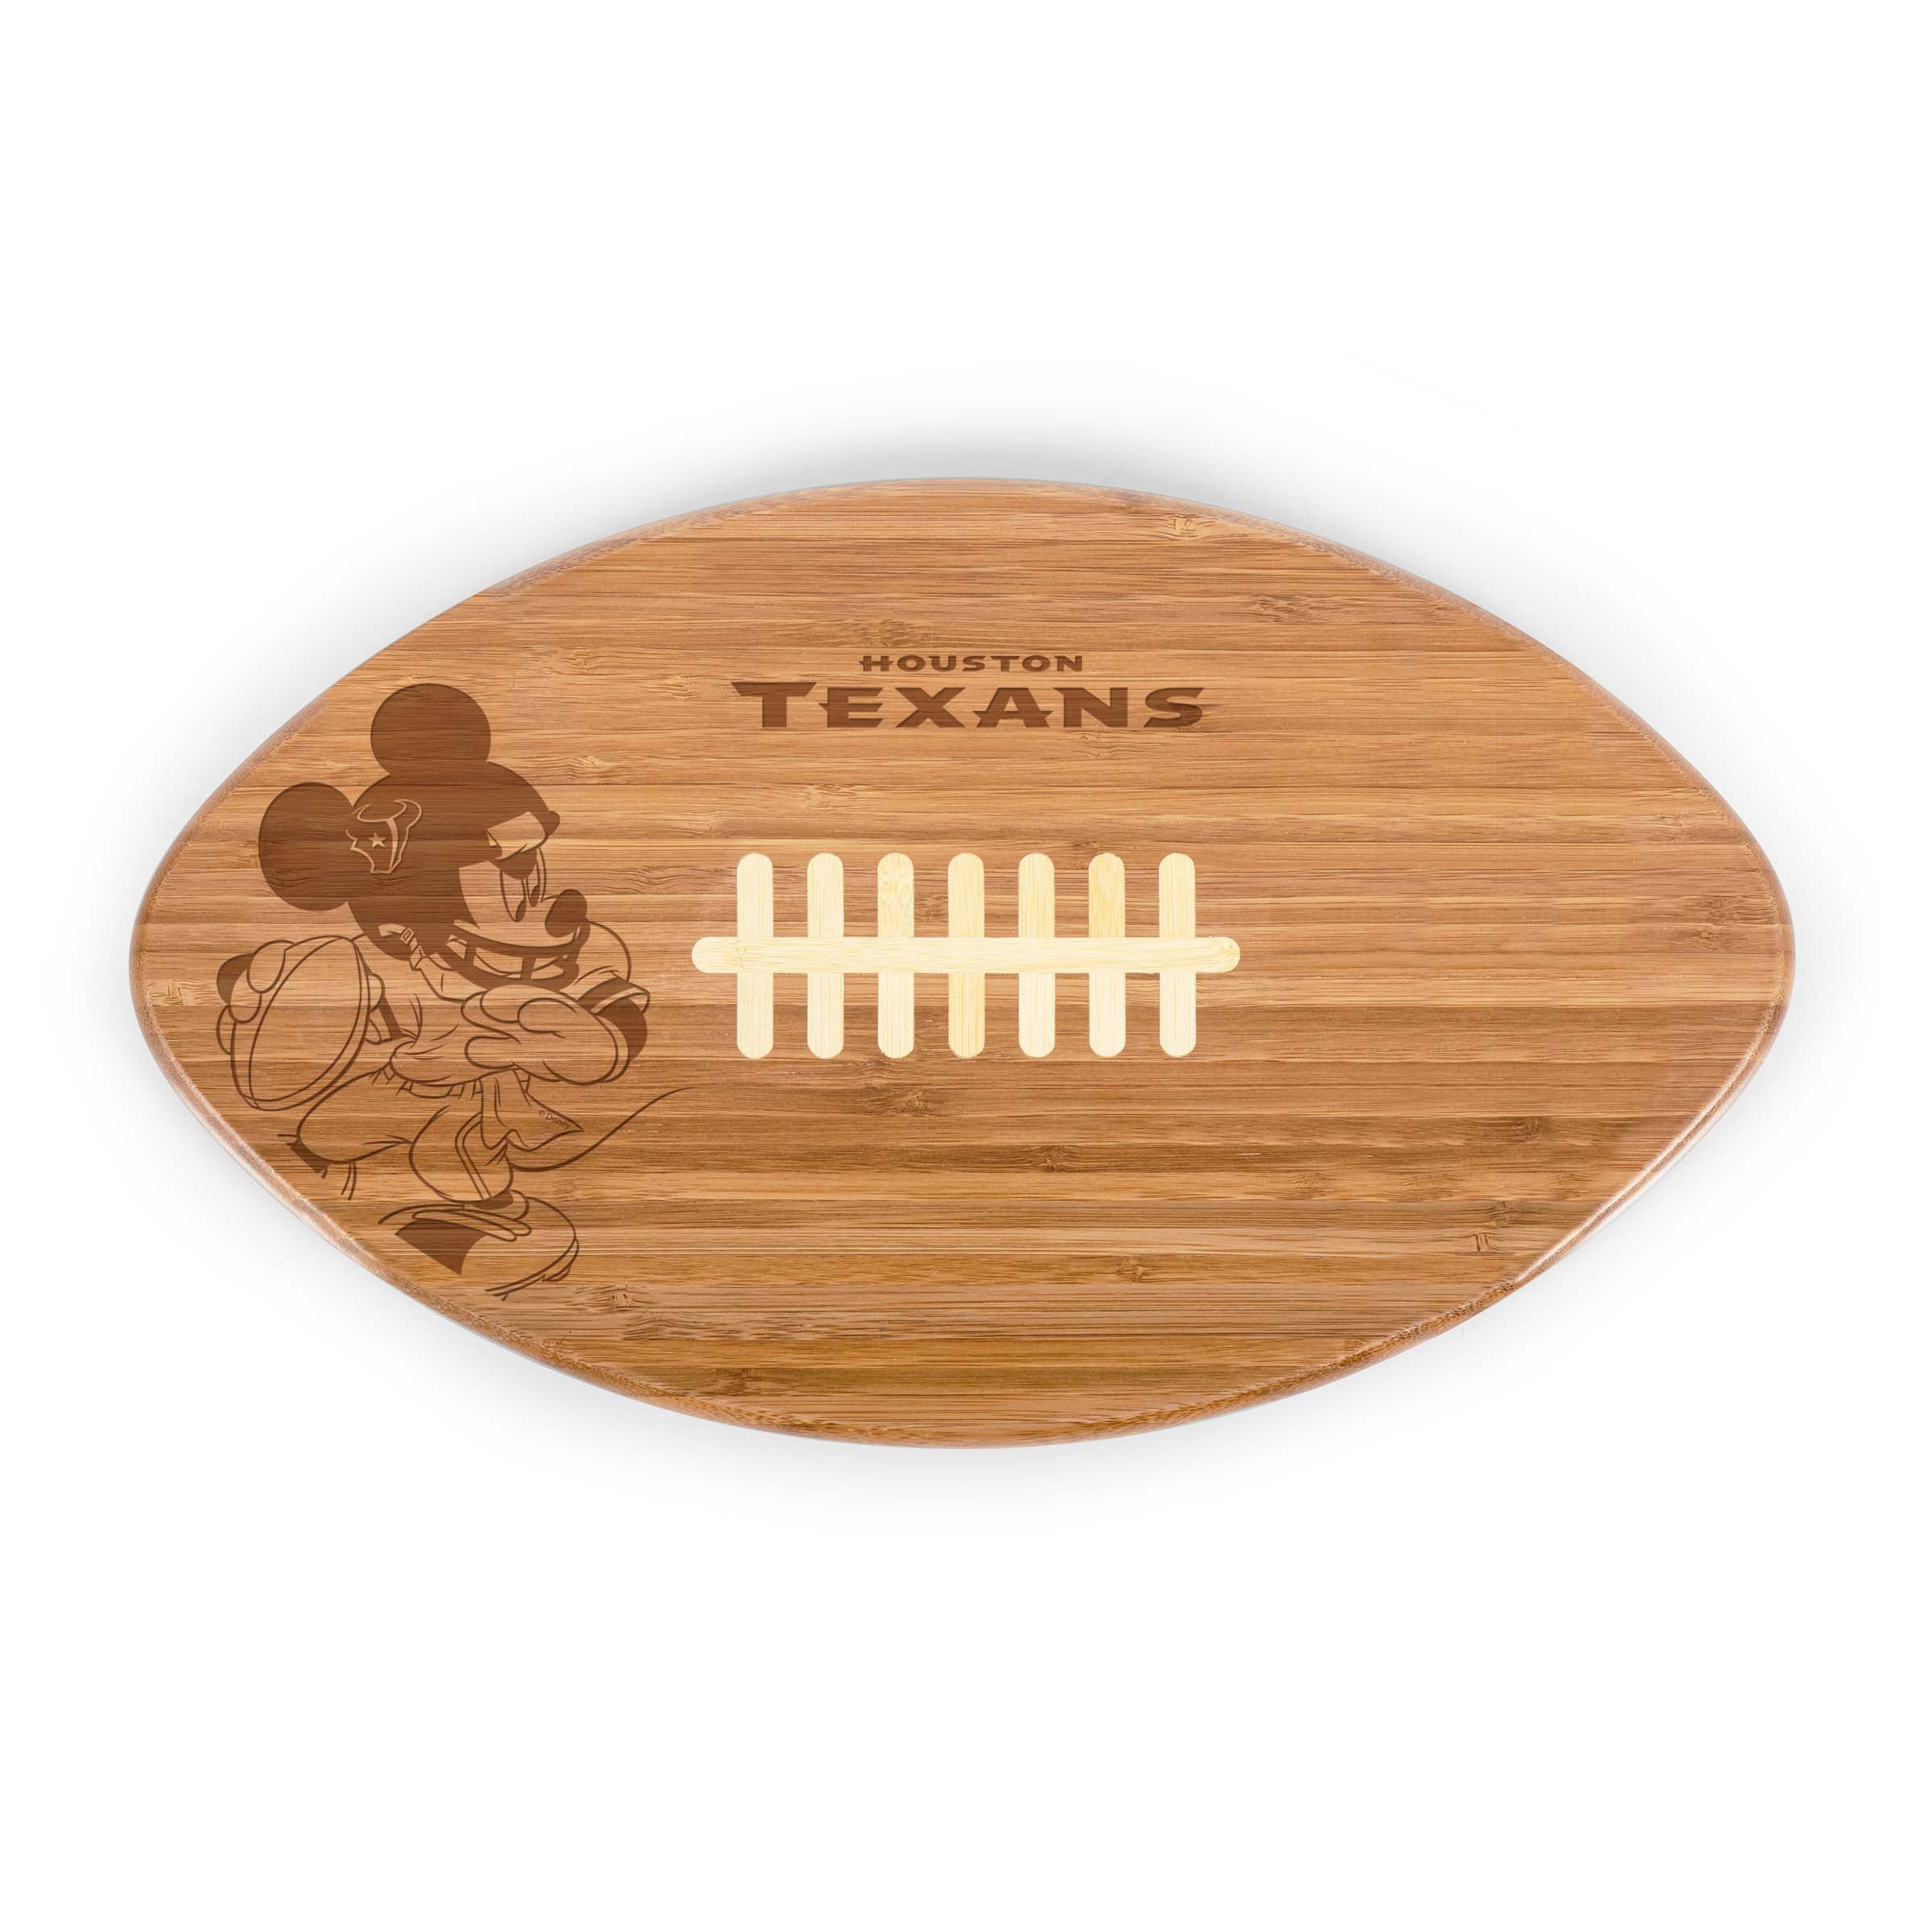 Houston Texans Mickey Mouse - Touchdown! Football Cutting Board & Serving Tray